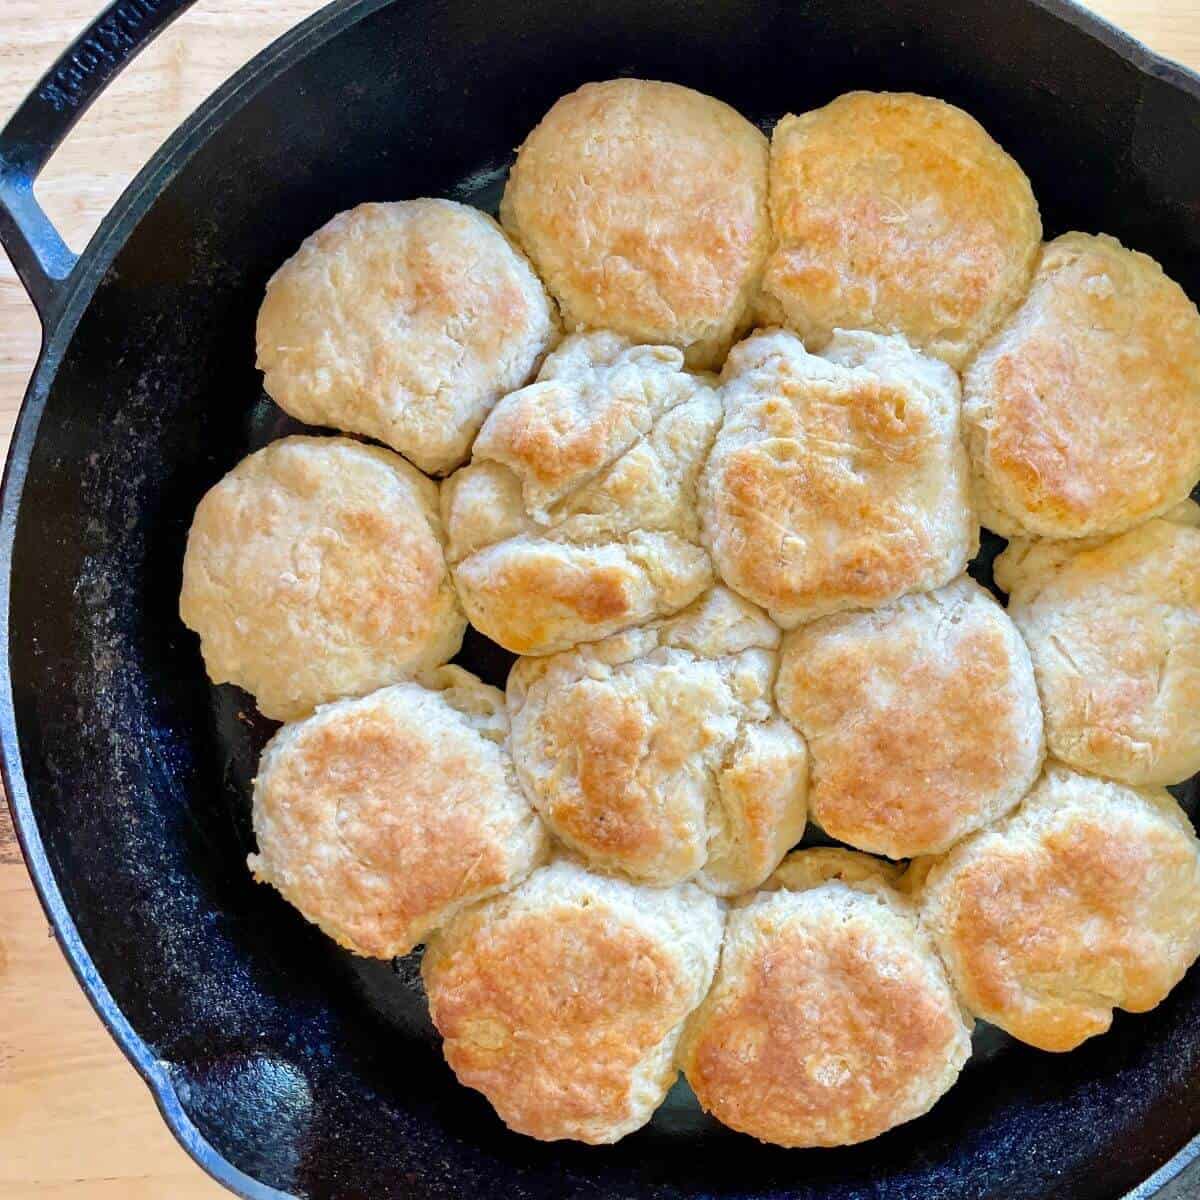 Cast Iron Skillet Biscuits - My Homemade Biscuits Recipe